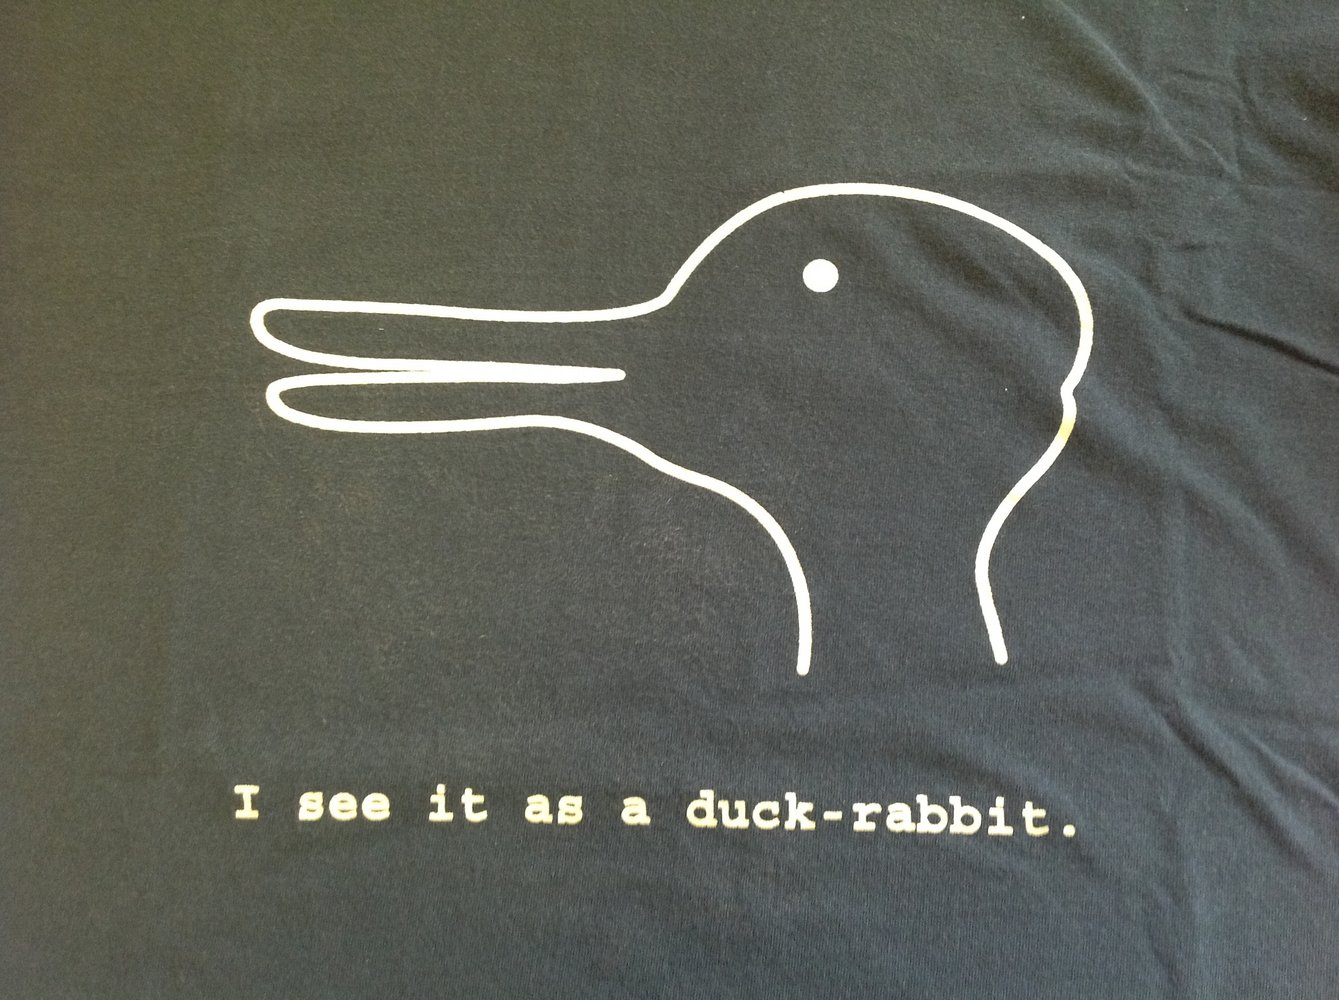 2007 green shirt with white lettering and duck/rabbit picture